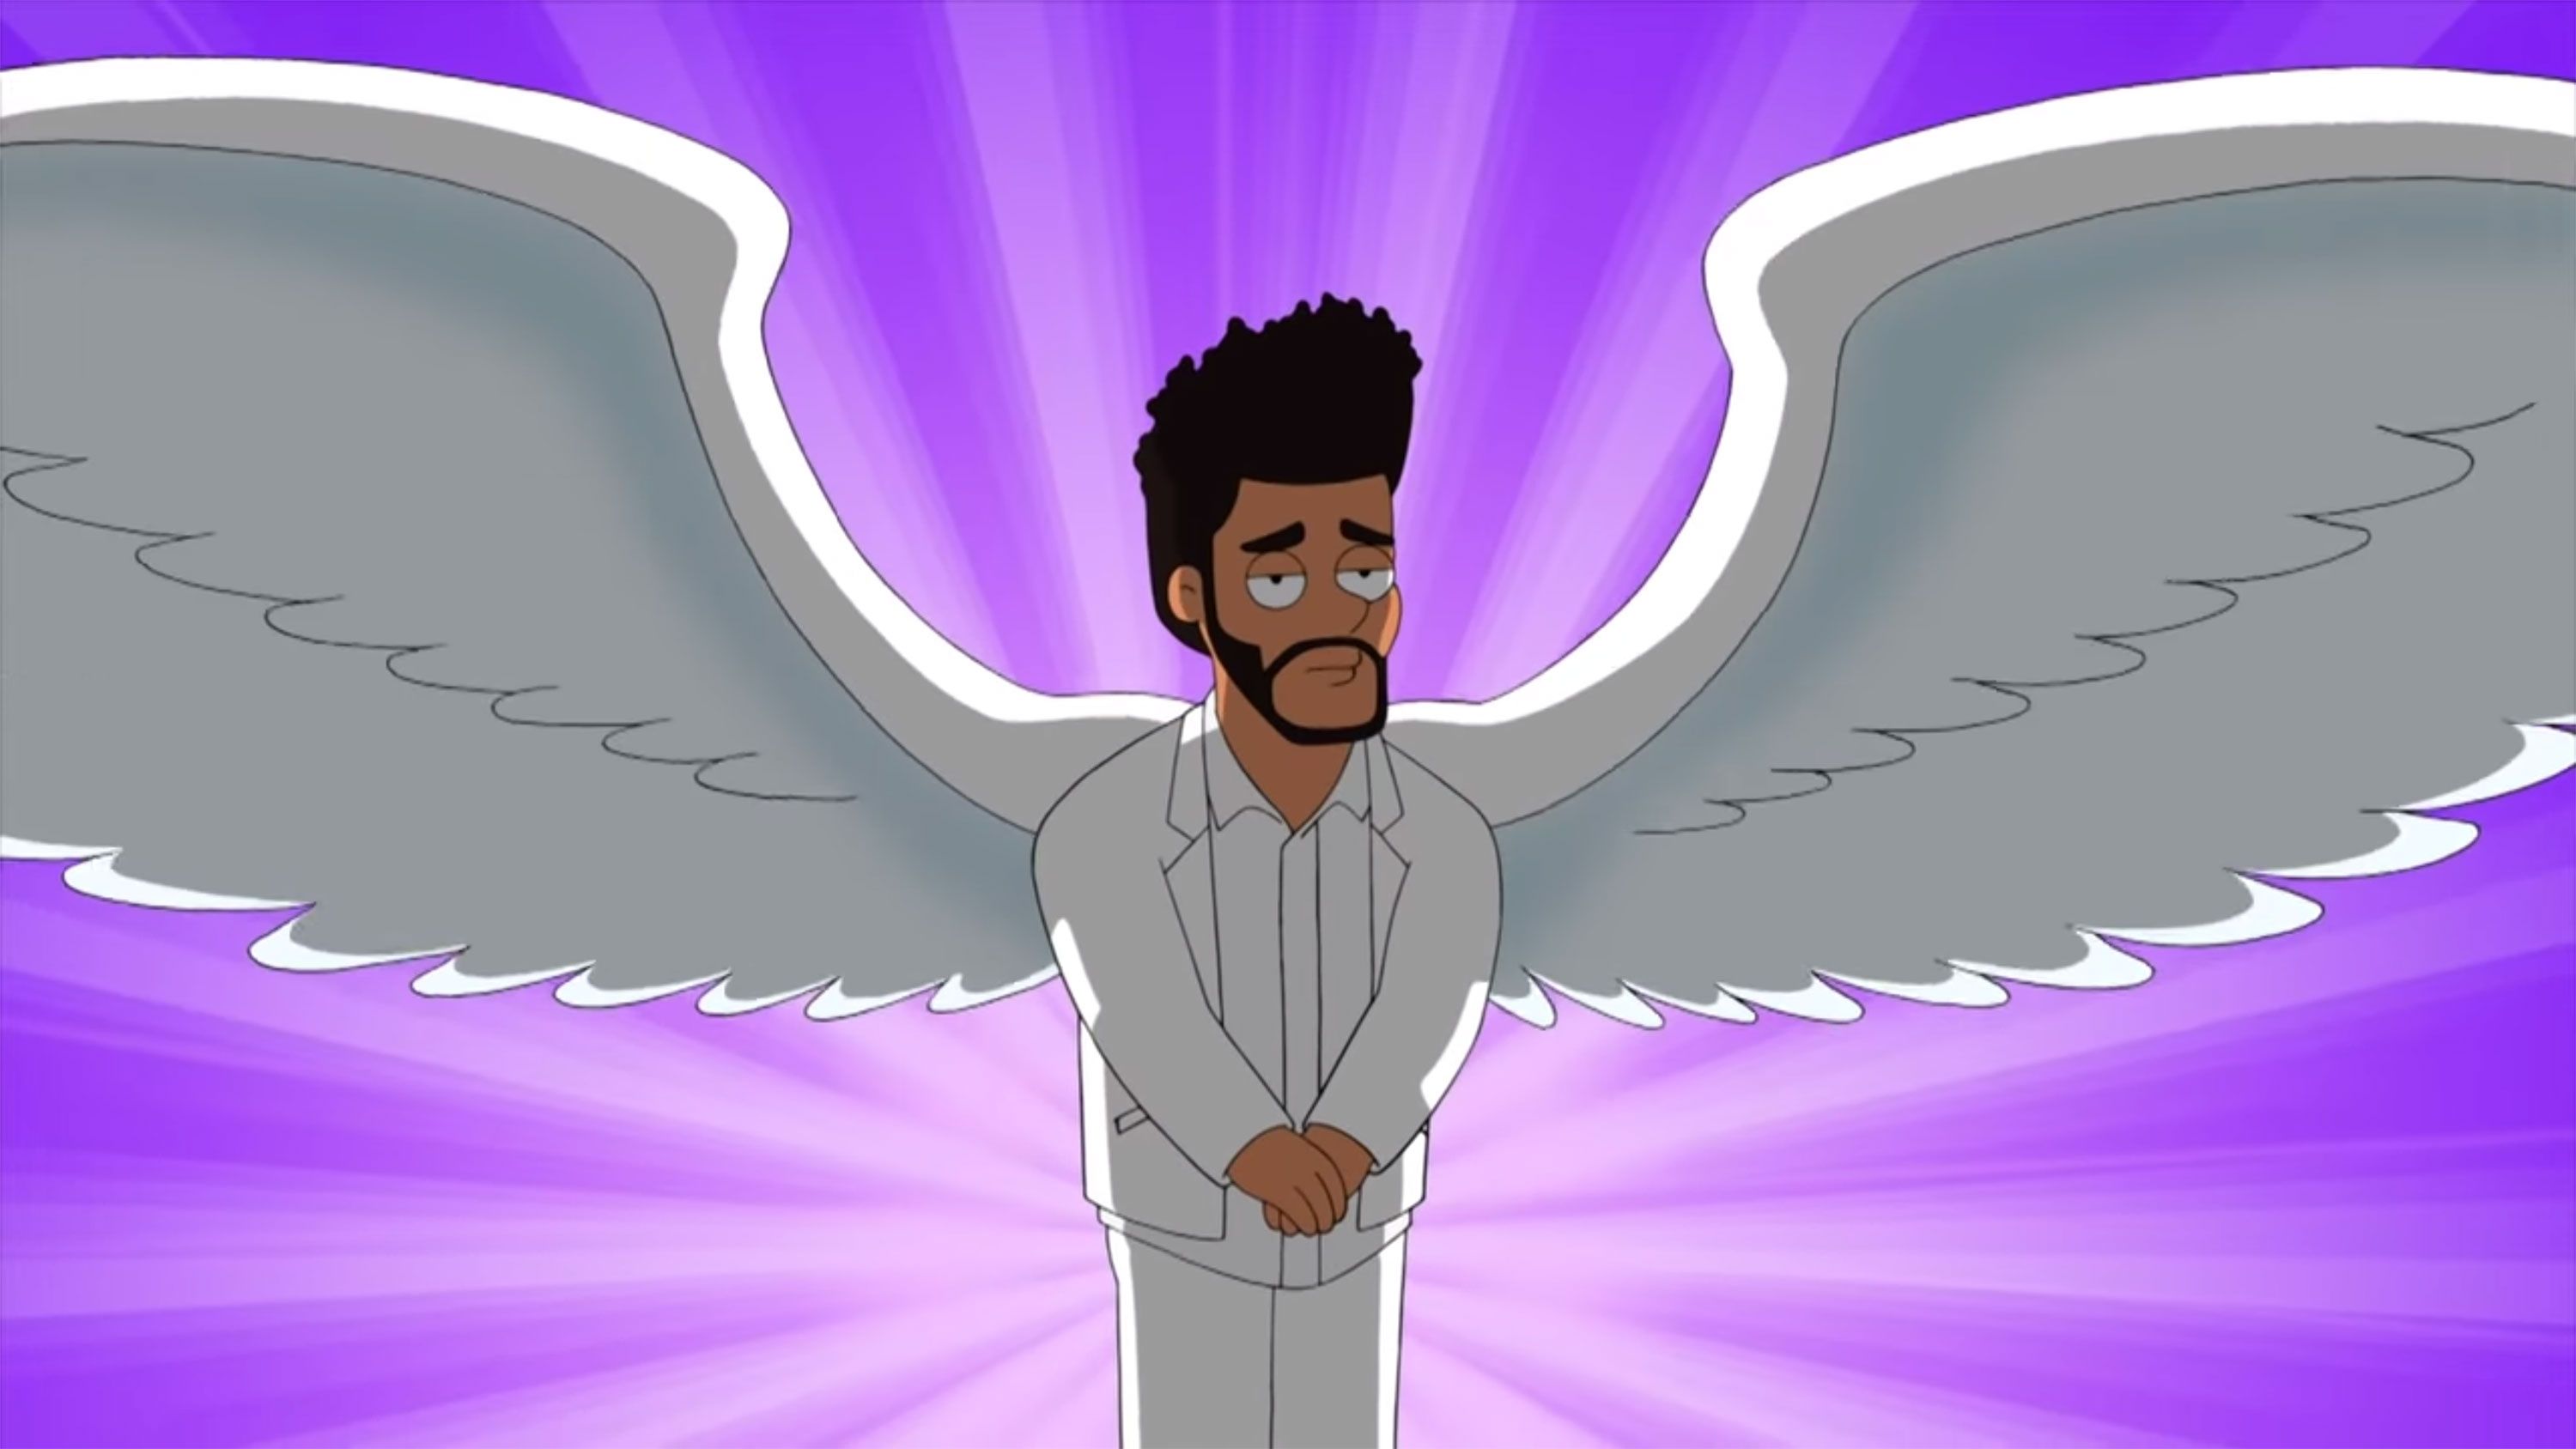 WATCH: The Weeknd on 'American Dad' and 'I'm a Virgin' Song